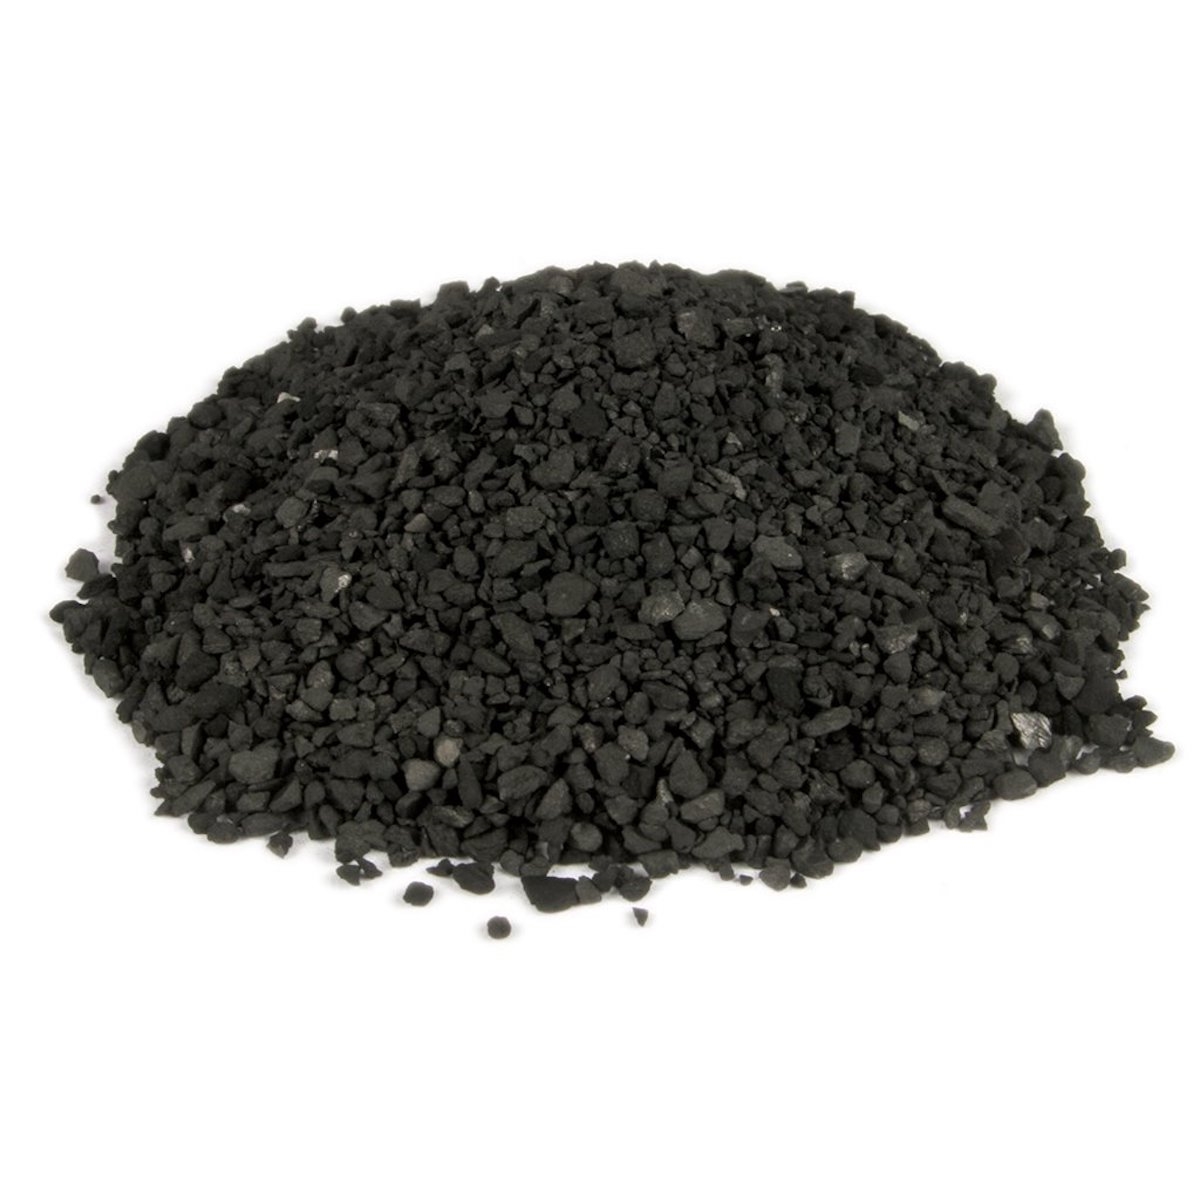 Granular Activated Carbon, Granulated carbon suppl